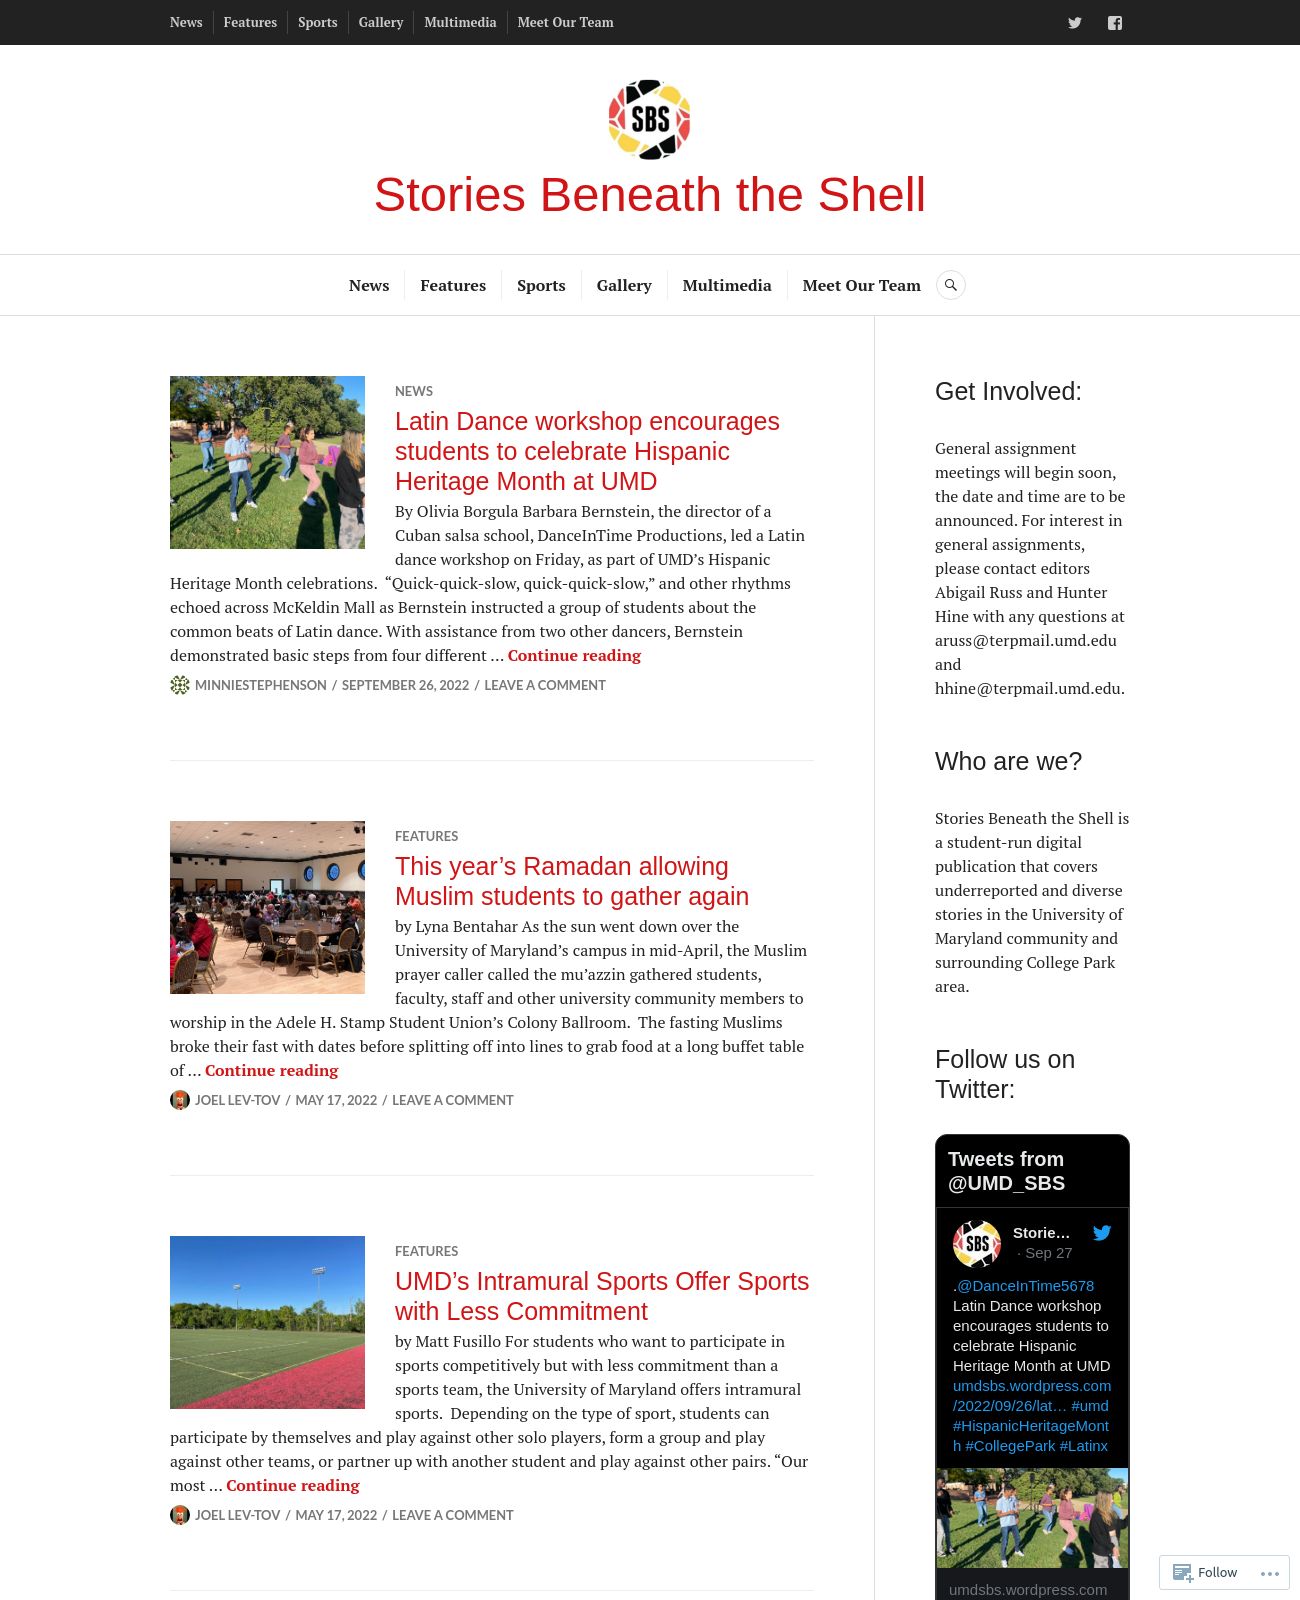 Stories Beneath the Shell at 2022-09-30 12:19:44-04:00 local time